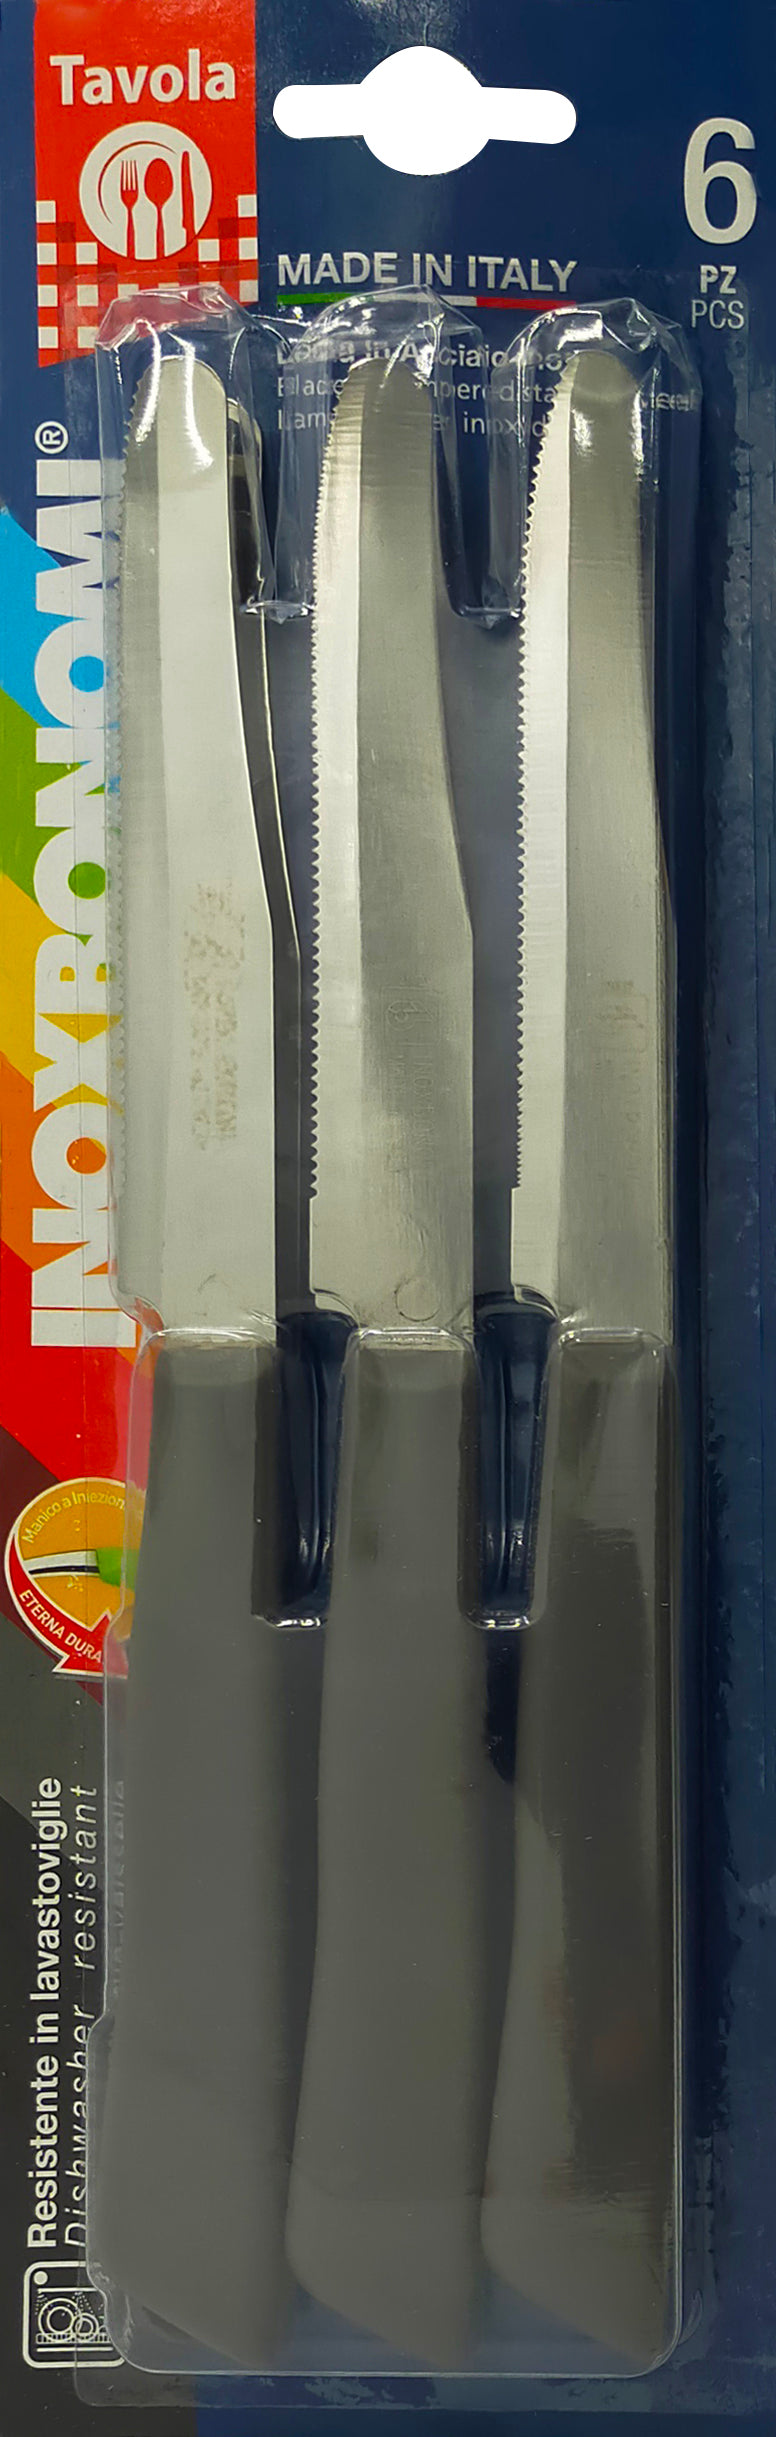 Table knives set of 6